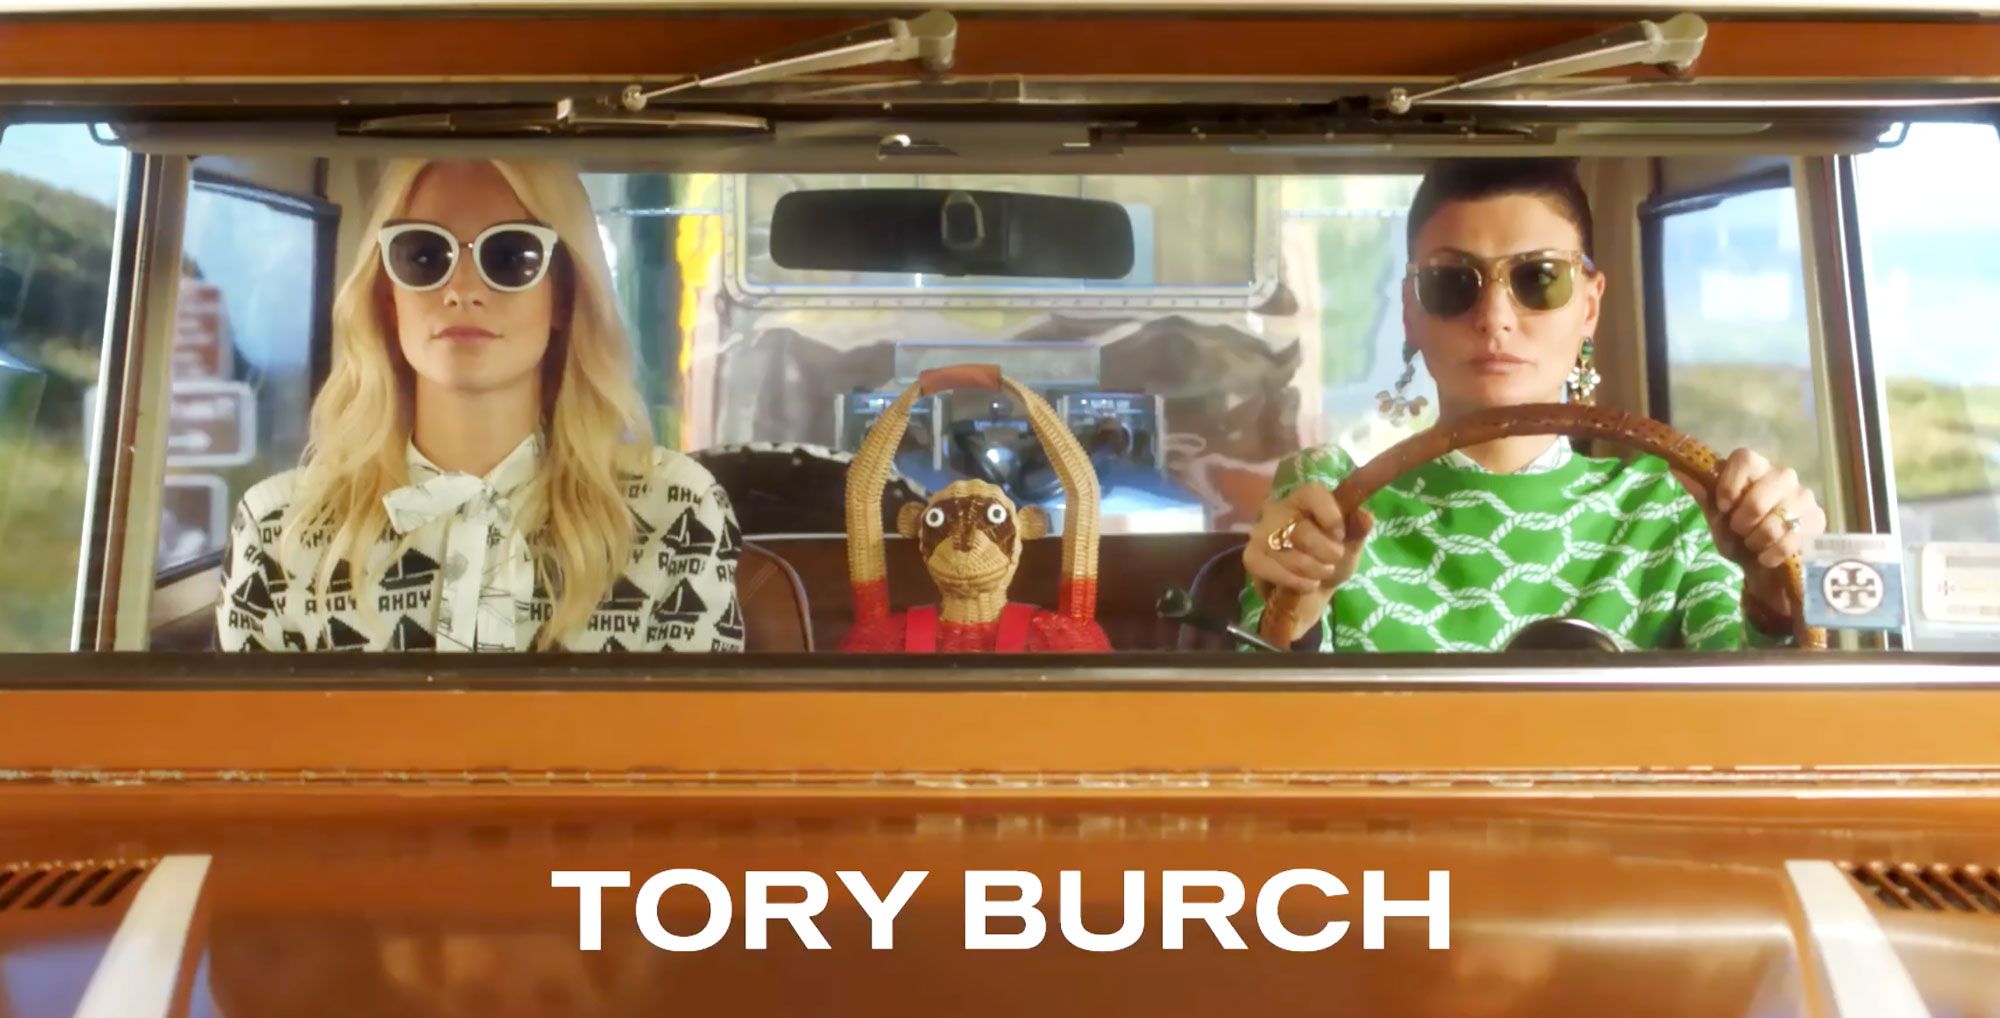 Tory Burch Apologizes for Culturally Insensitive Ad